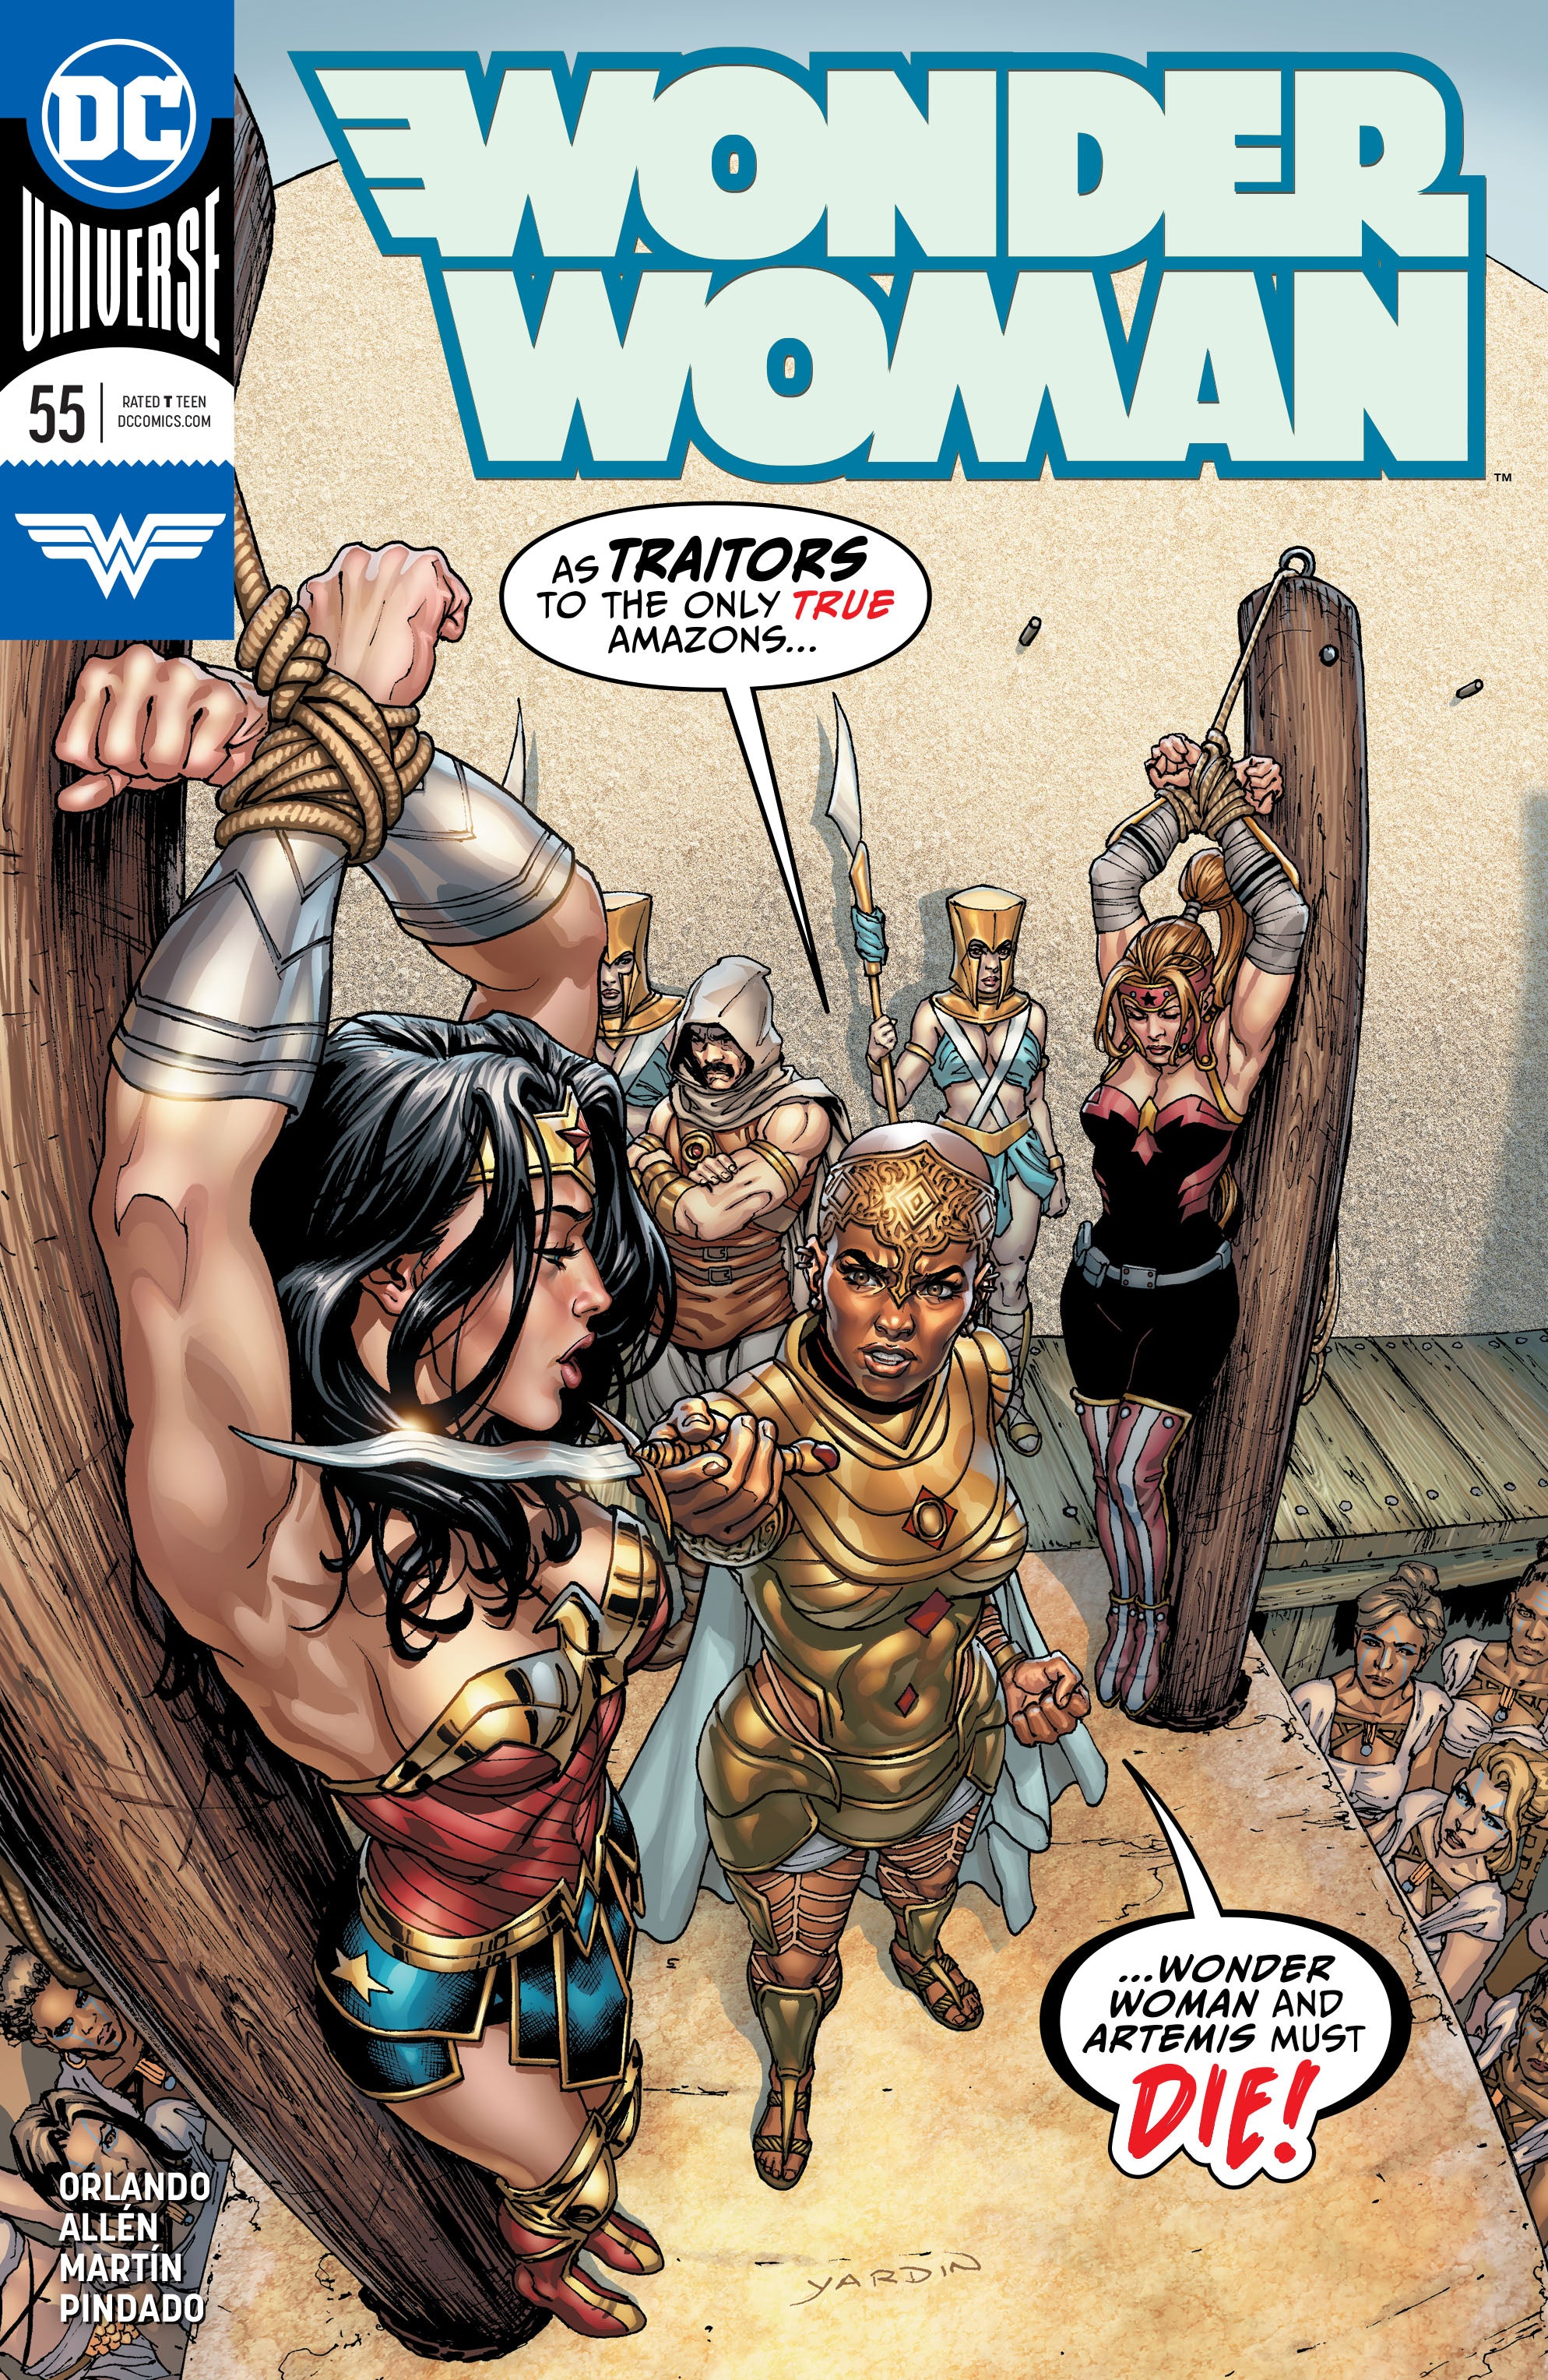 WONDER WOMAN #55 | Game Master's Emporium (The New GME)